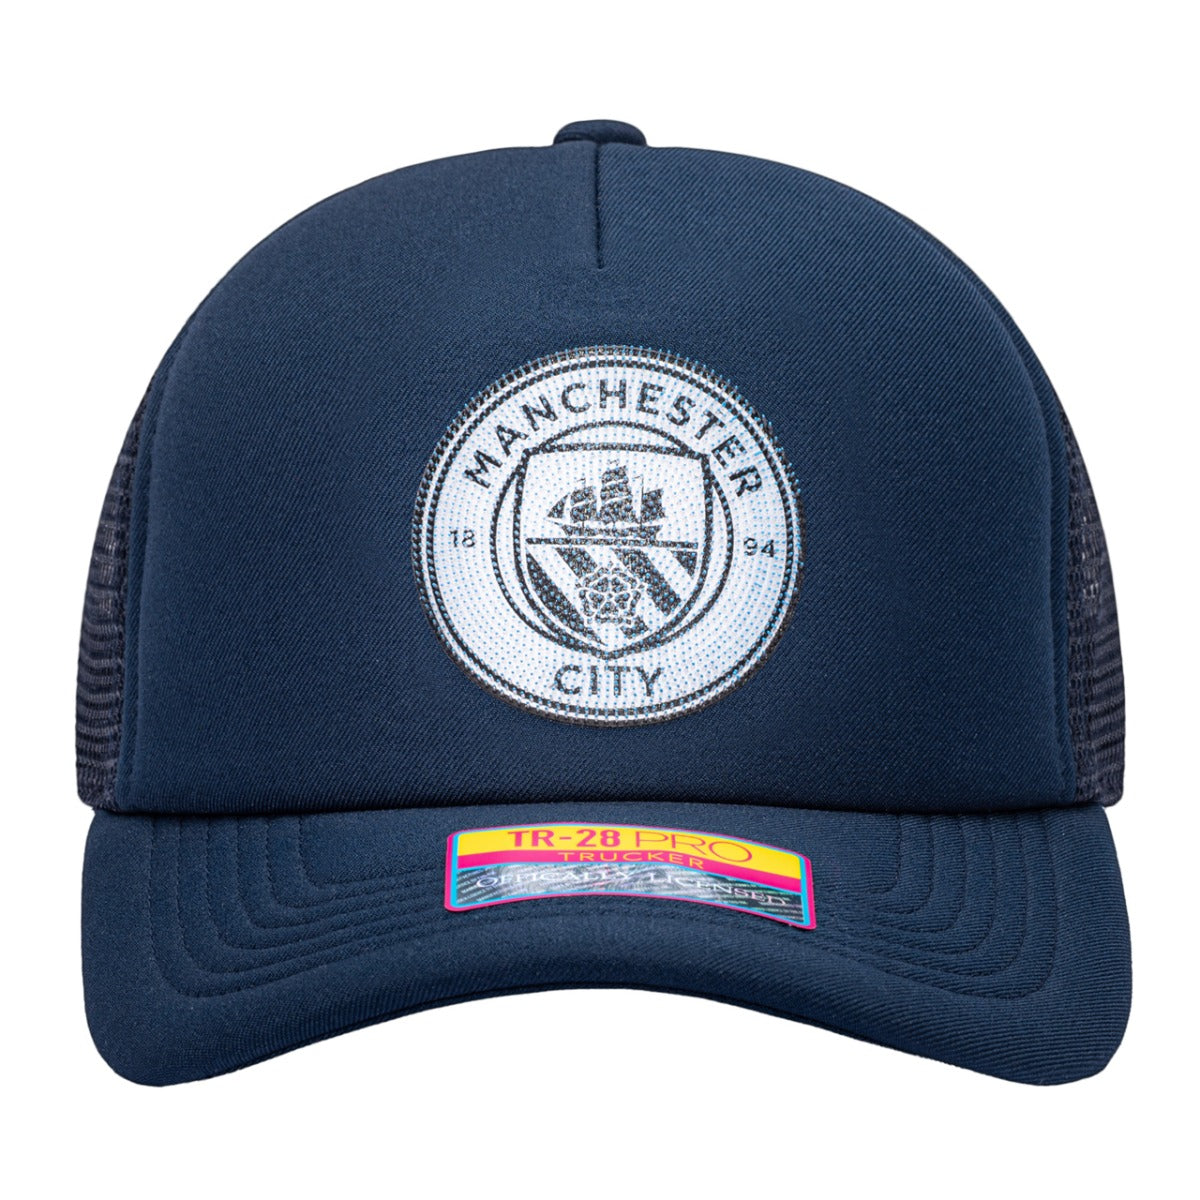 FI Collection Manchester City Shield Trucker Hat - Navy (Front)